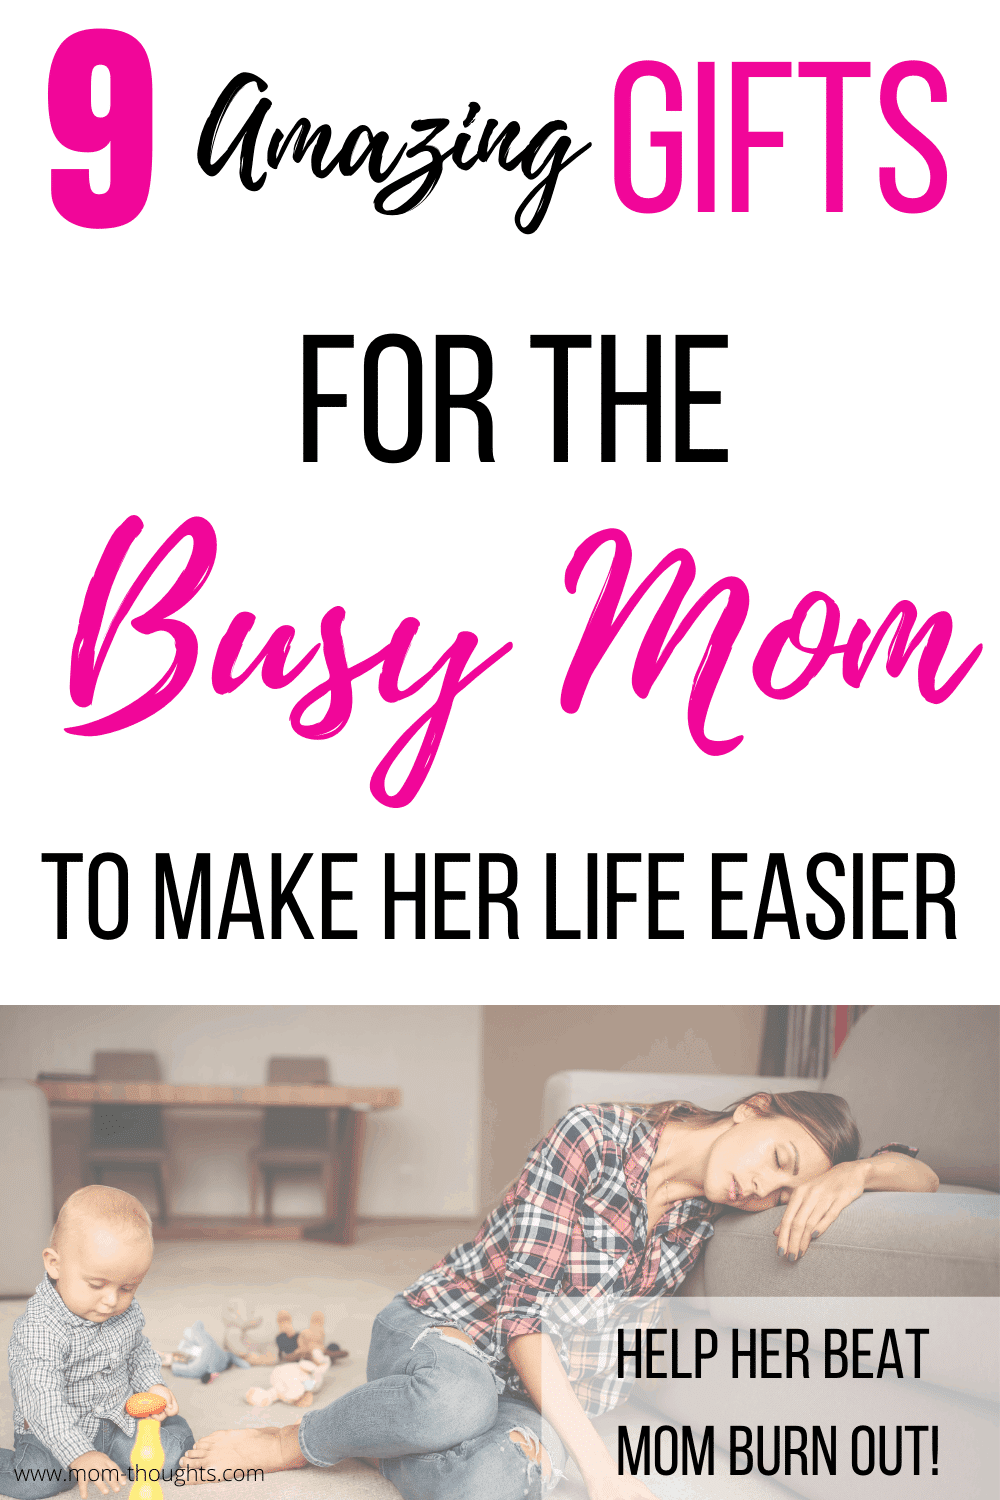 Things That Make Mom’s Life Easier - Mom-Thoughts